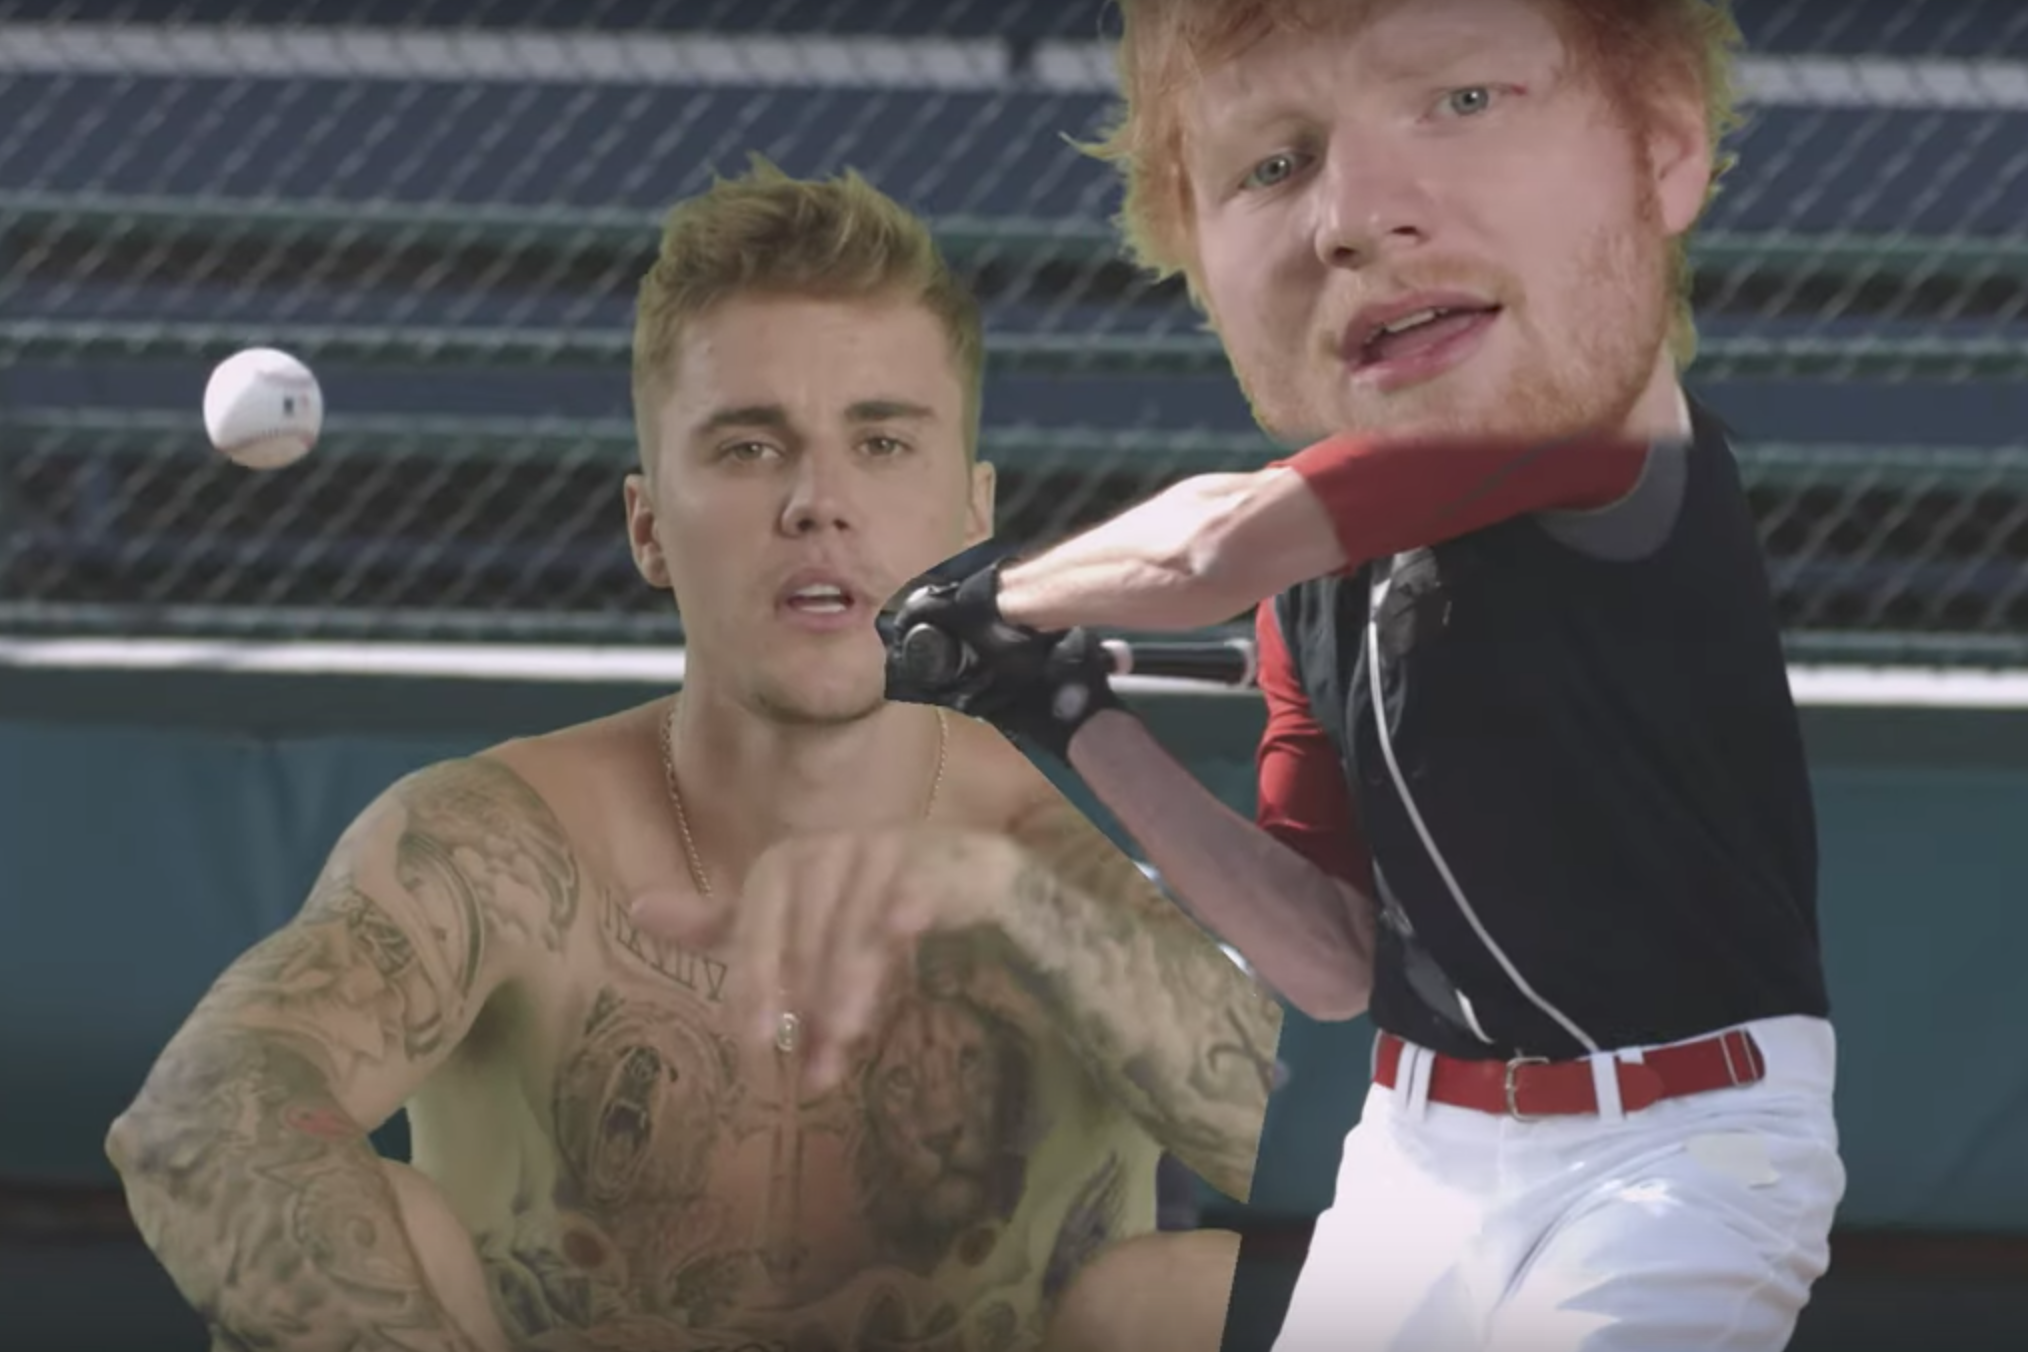 Justin Bieber and Ed Sheeran release video for new song 'I Don't Care' | The Independent